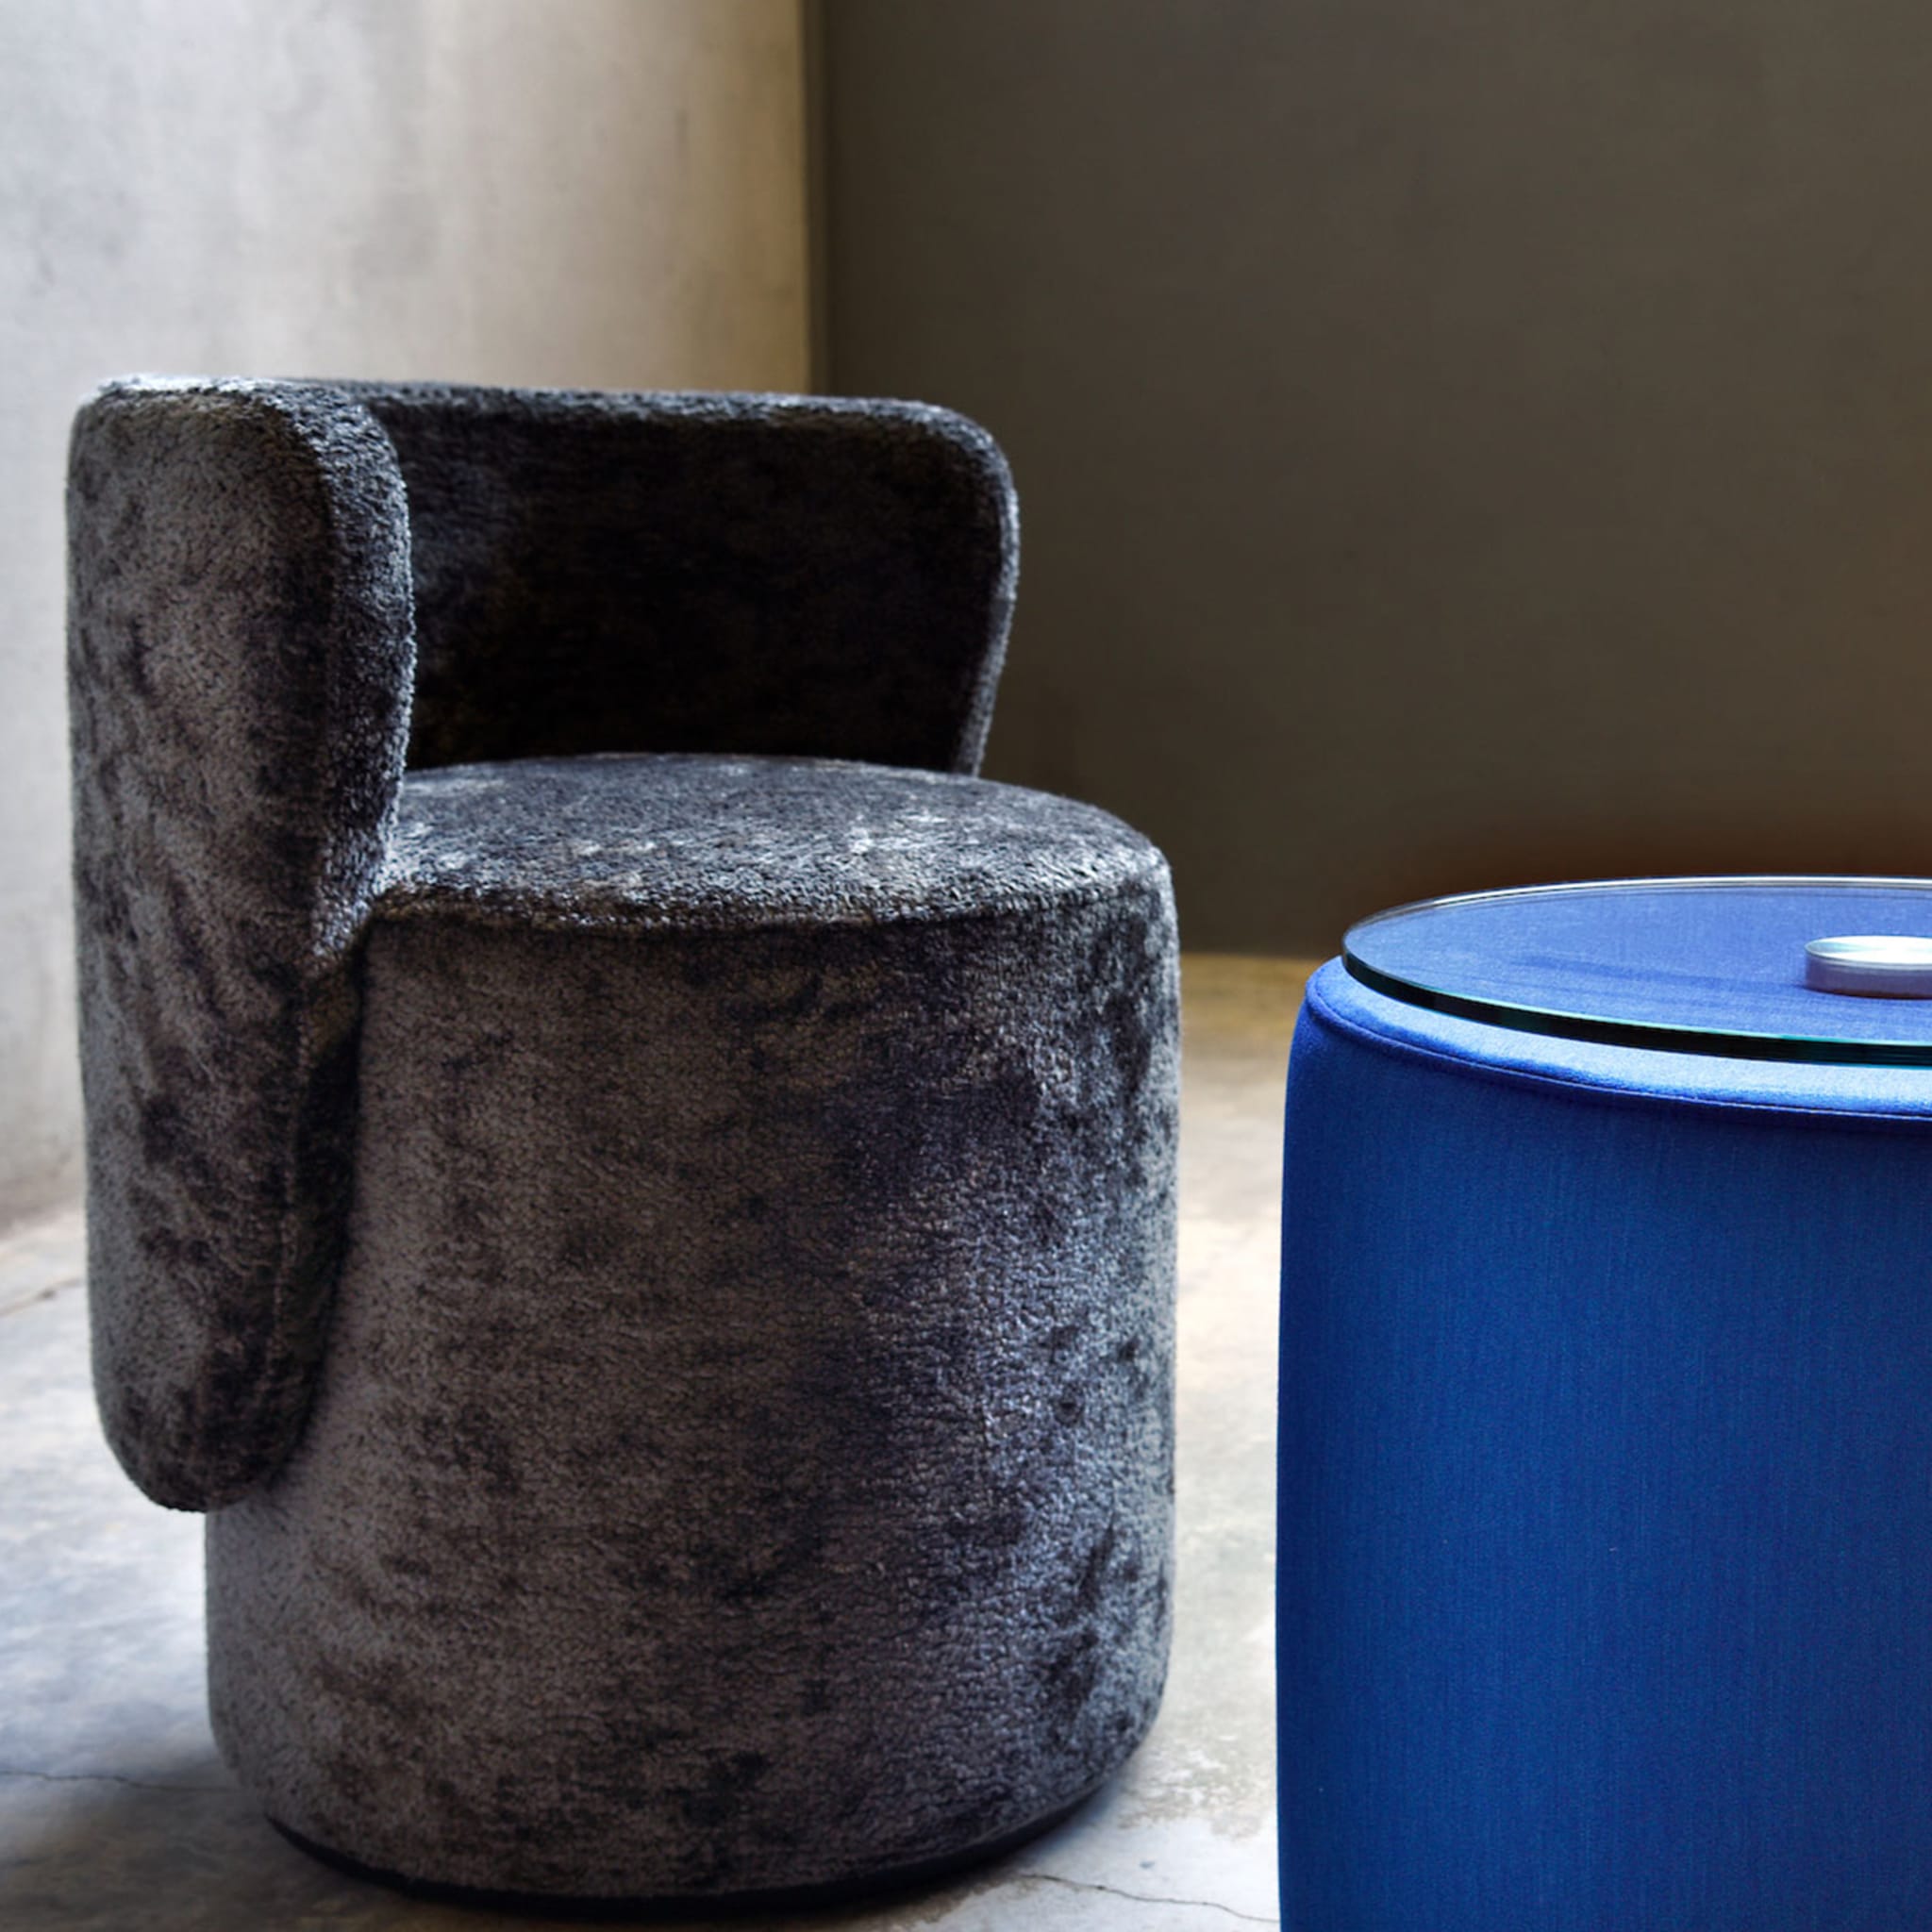 Boll Cylindrical Blue Accent Table by Simone Micheli - Alternative view 1